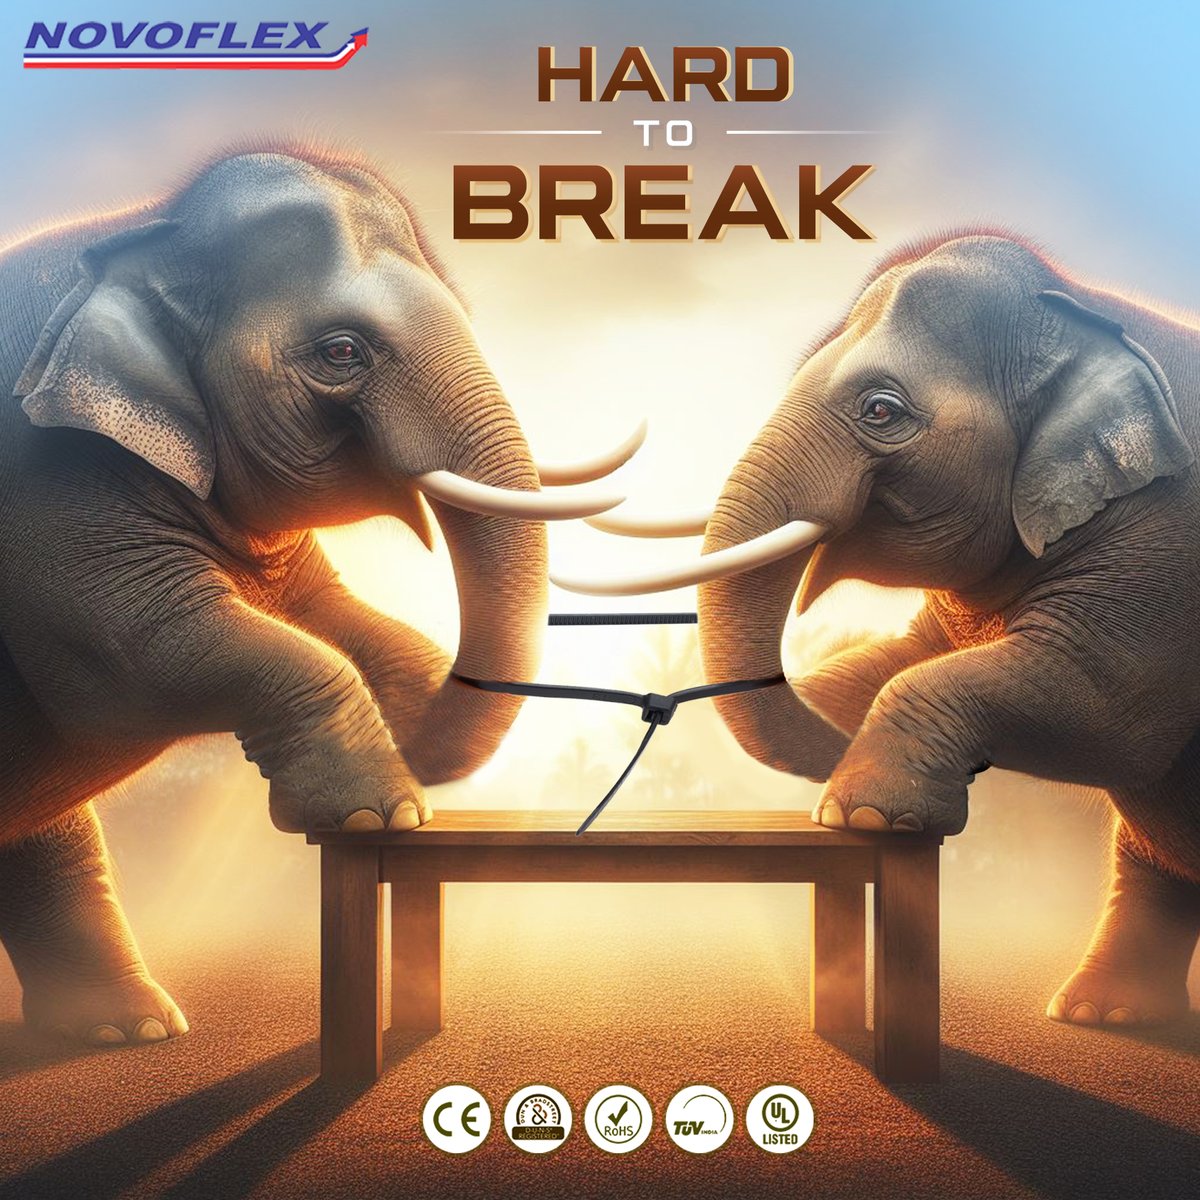 Strength beyond measure! Witness the unbeatable durability of Novoflex Zip Ties as two mighty elephants put them to the ultimate test.
#novoflex #topcableties #cableties #industrialuse #costeffective #manufacturing #products #versatileproducts #novoflexineverysector